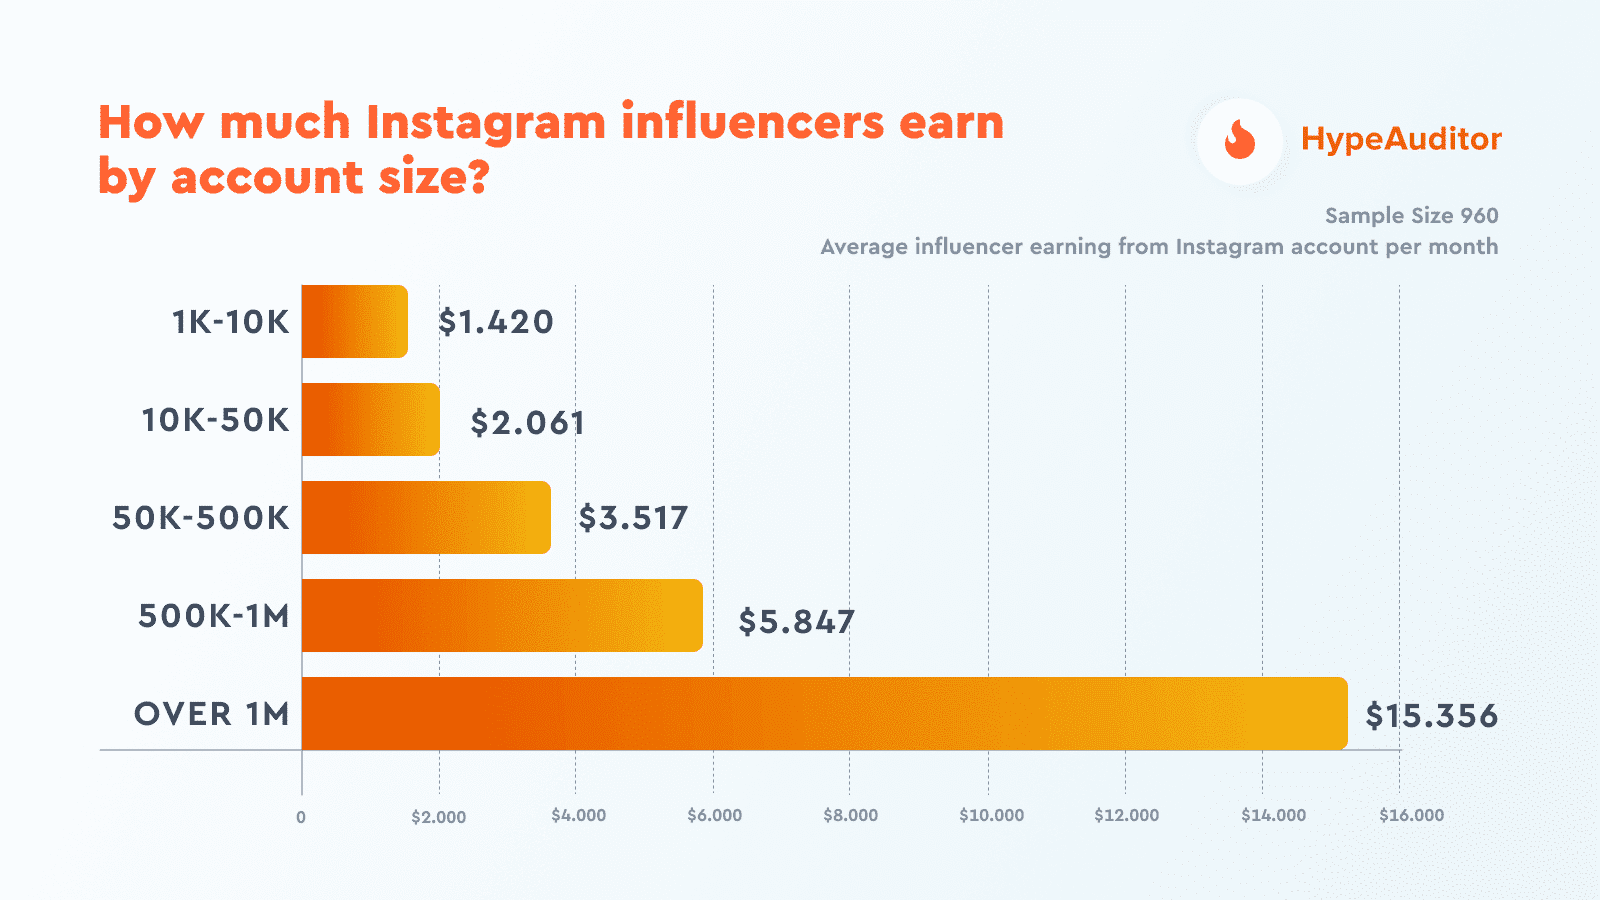 How much money does 1 million followers make?